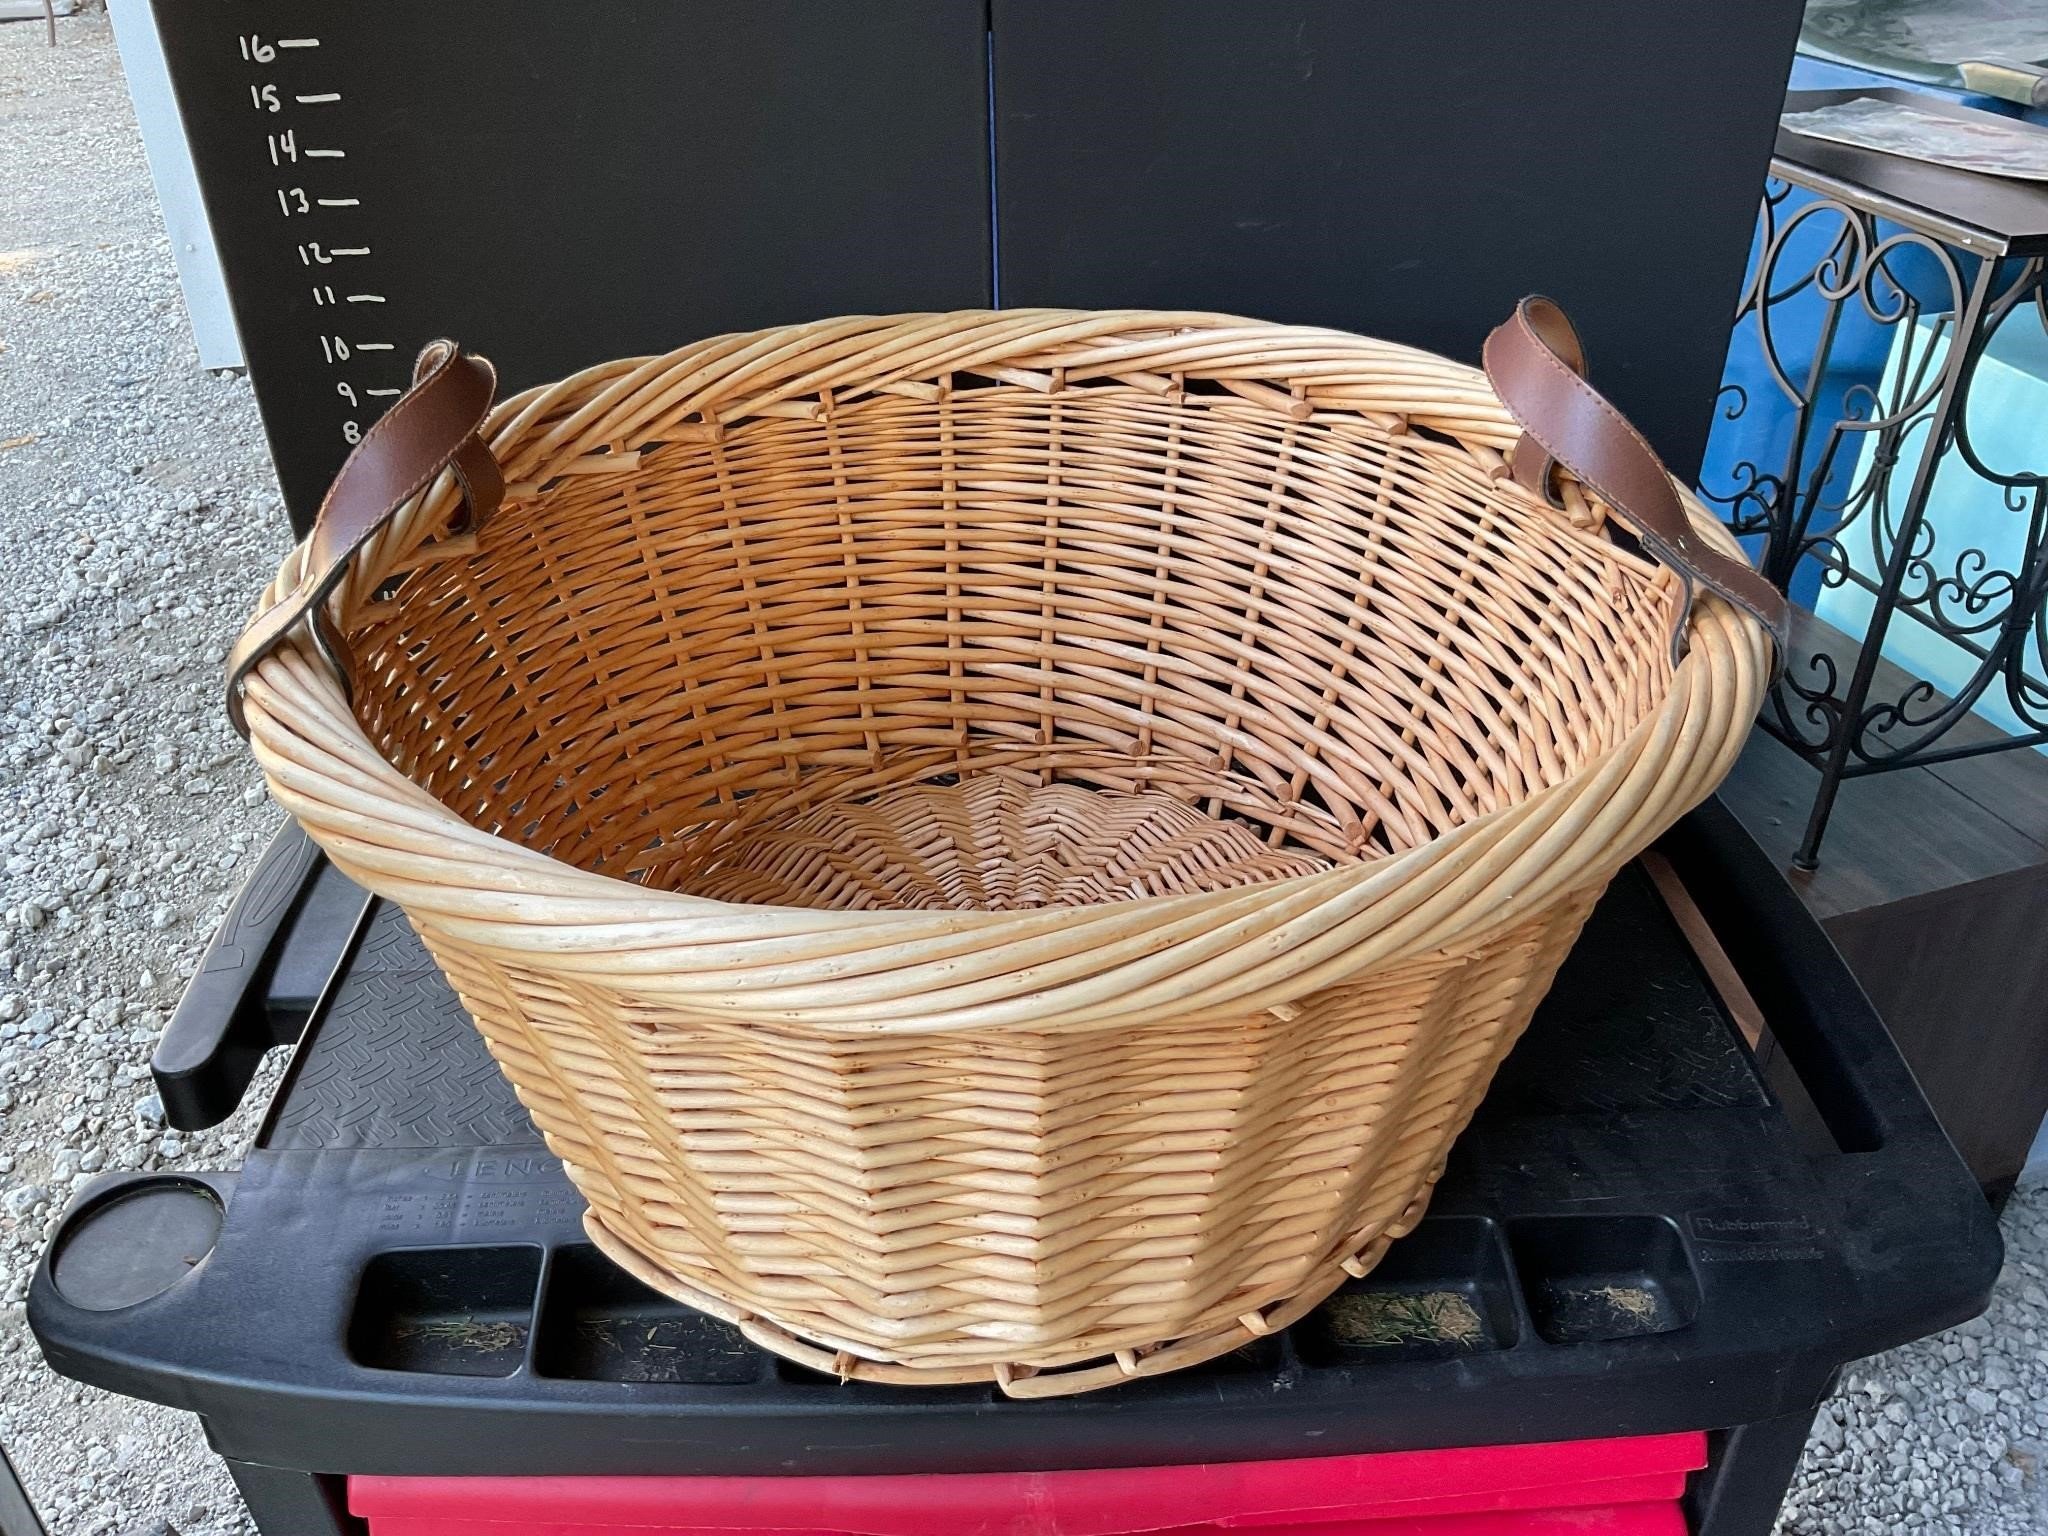 Larger basket with handles wicker